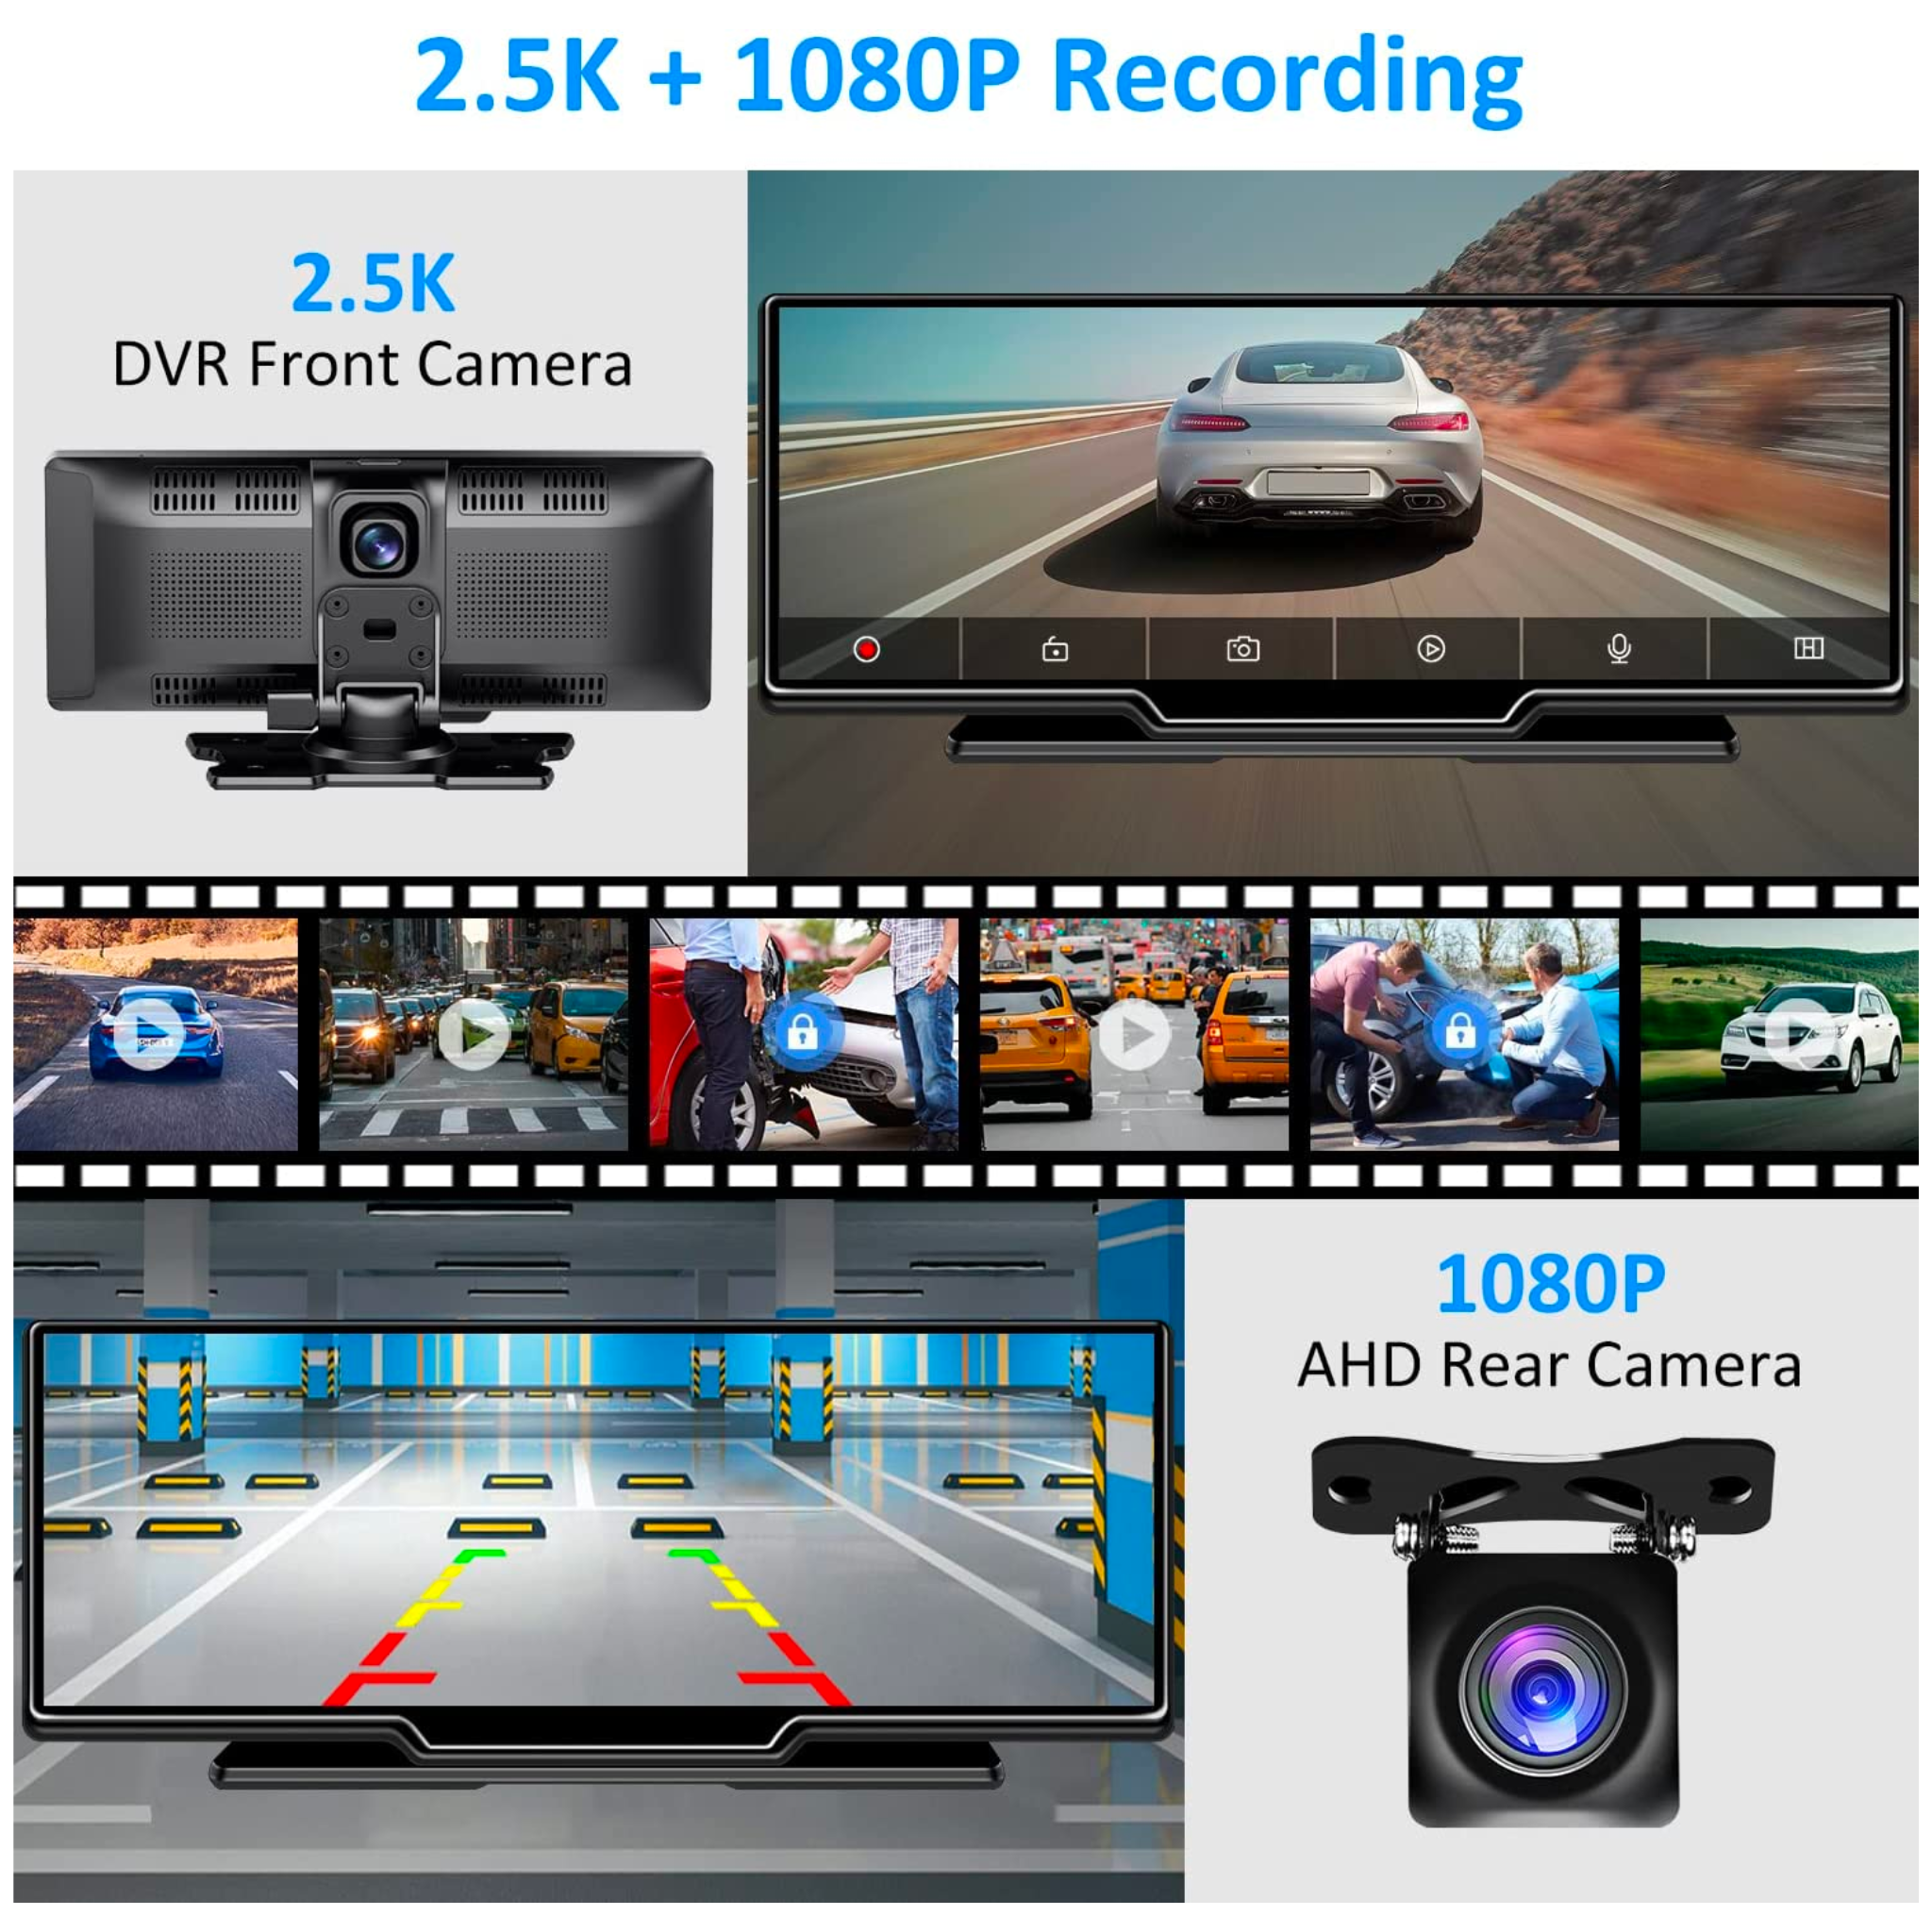 Wireless Carplay & Android Auto 1080P Dash Camera Car Stereo - 10.26" HD IPS Screen, Loop Recording & Bluetooth + More!